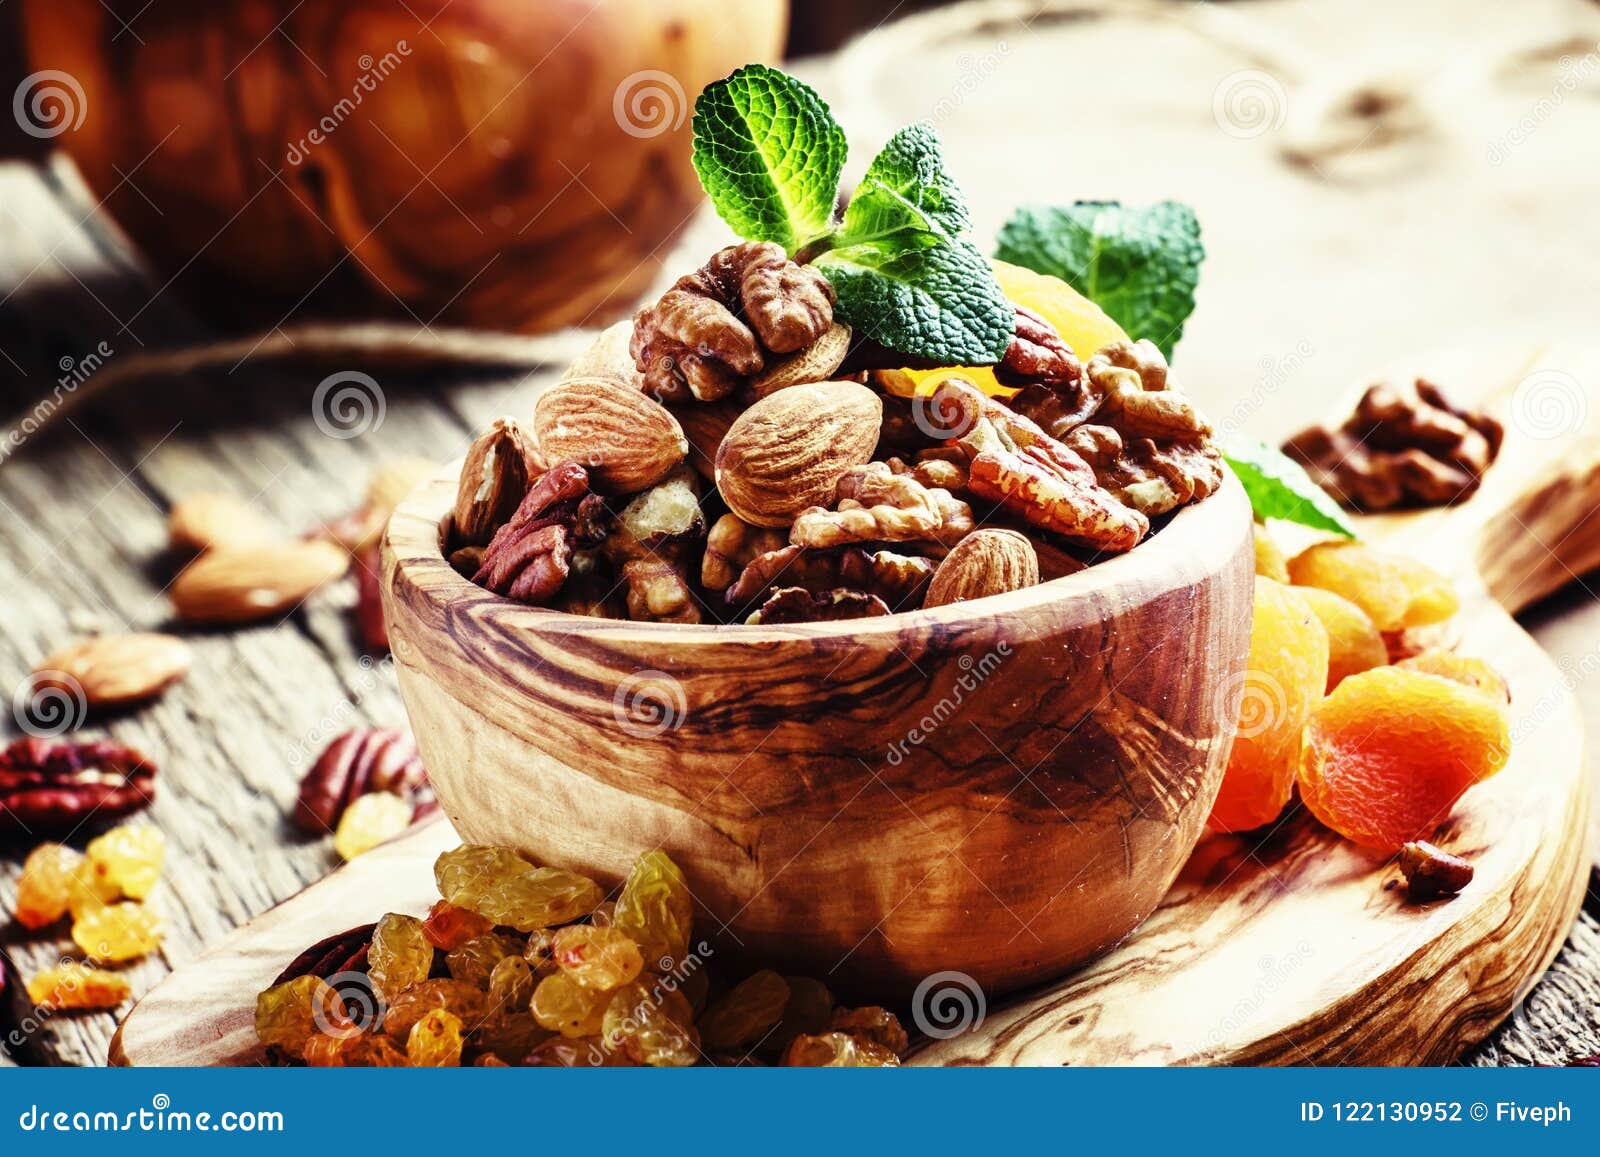 healthy snack: raw nuts and dried fruit, decorated with mint. vi